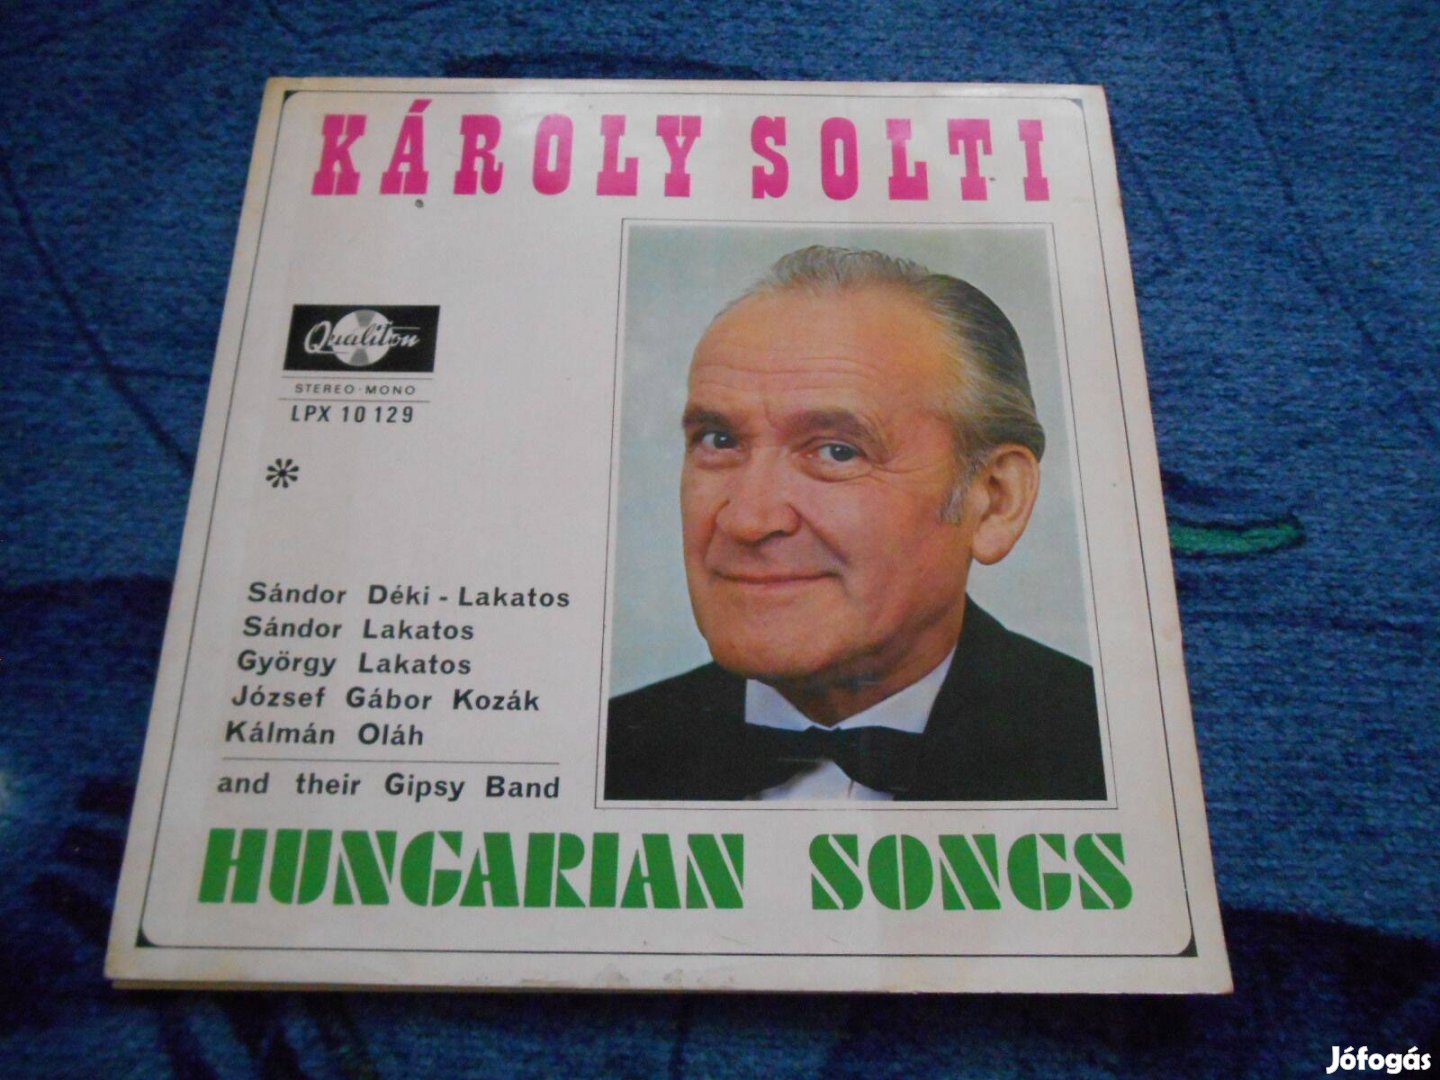 Károly Solti Hungarian Songs